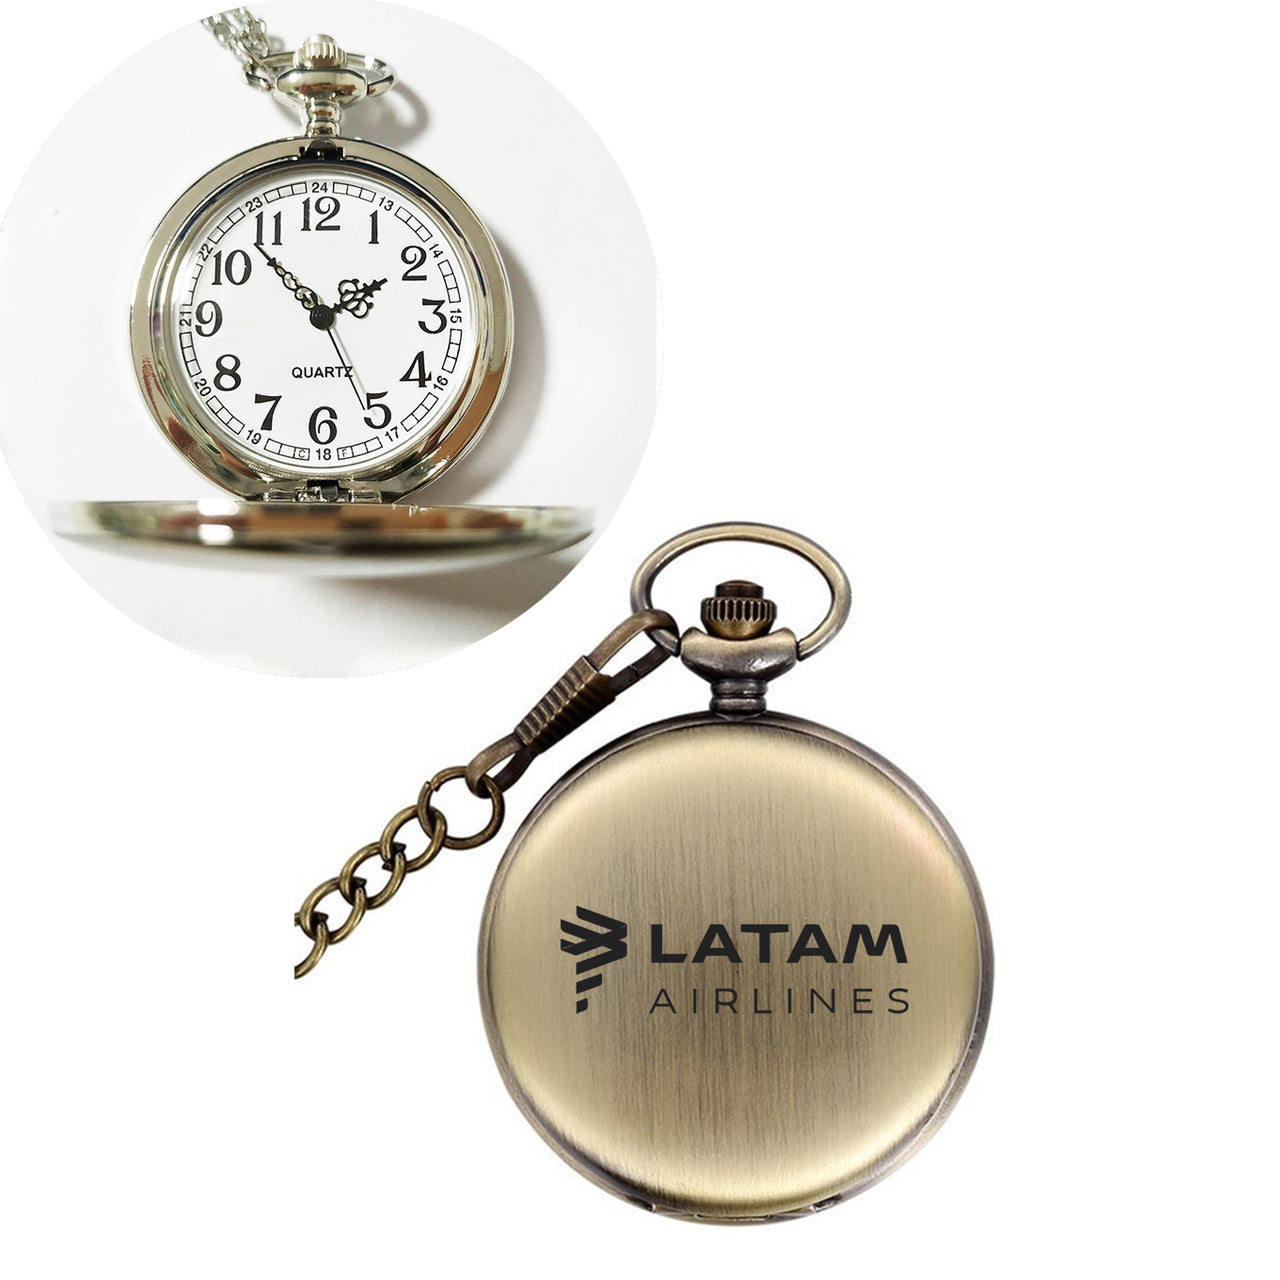 LATAM Airlines Designed Pocket Watches